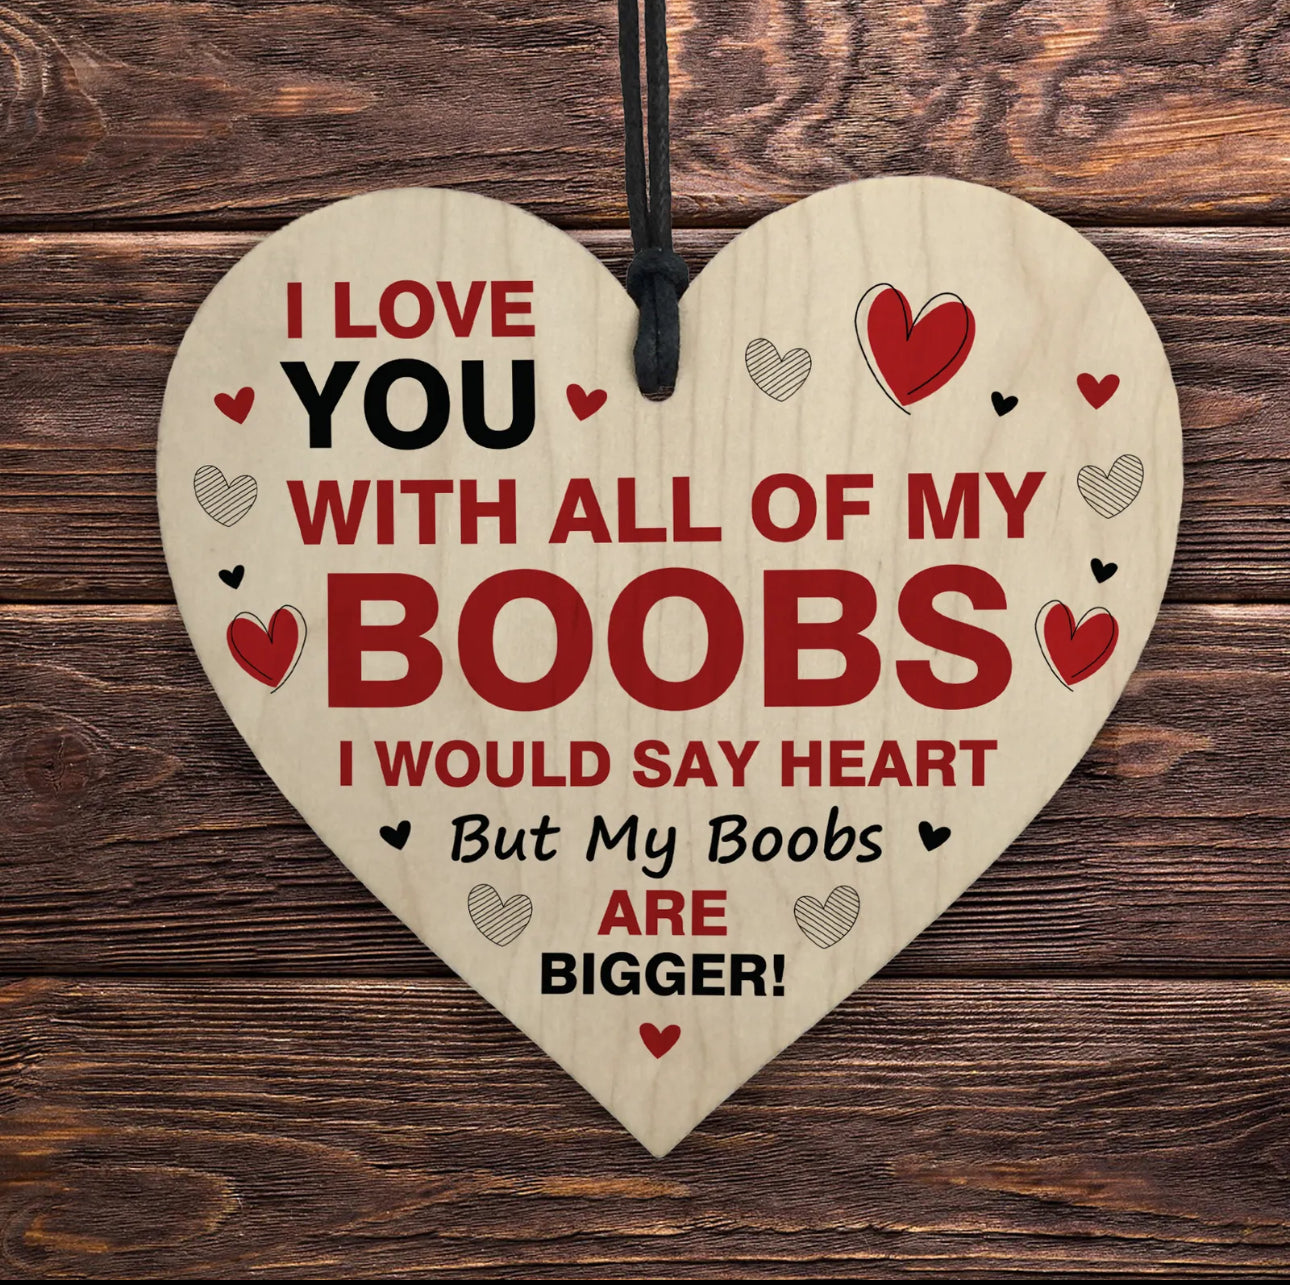 I love you with all my bum / boobs heart plaque